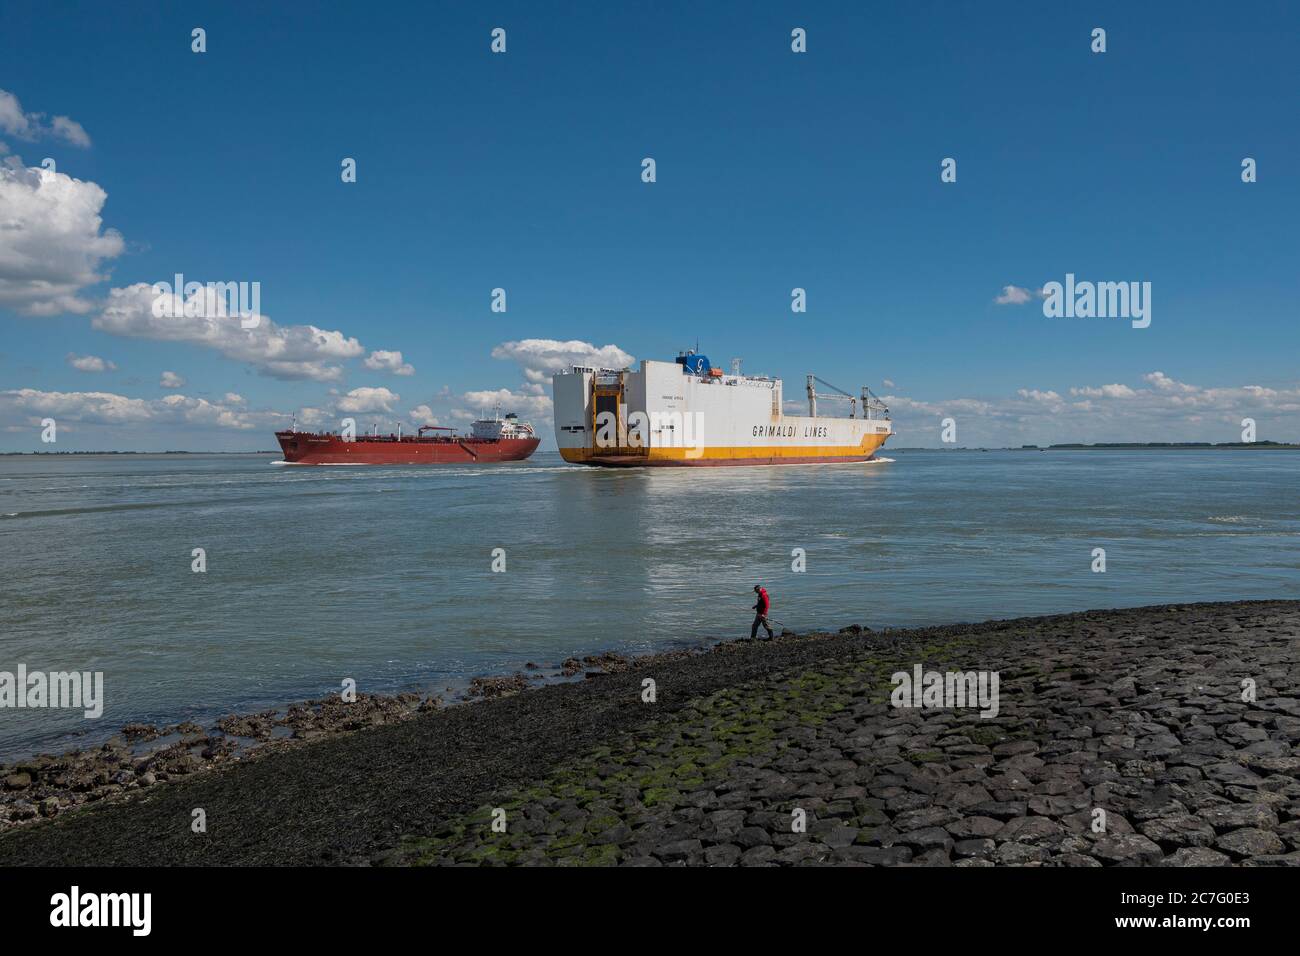 Terneuzen, the Netherlands 12 July 2020, Cargo ships Grimaldi lines, Grande Afrika, and Oil Products Tanker SLOMAN THEMIS intersect Stock Photo